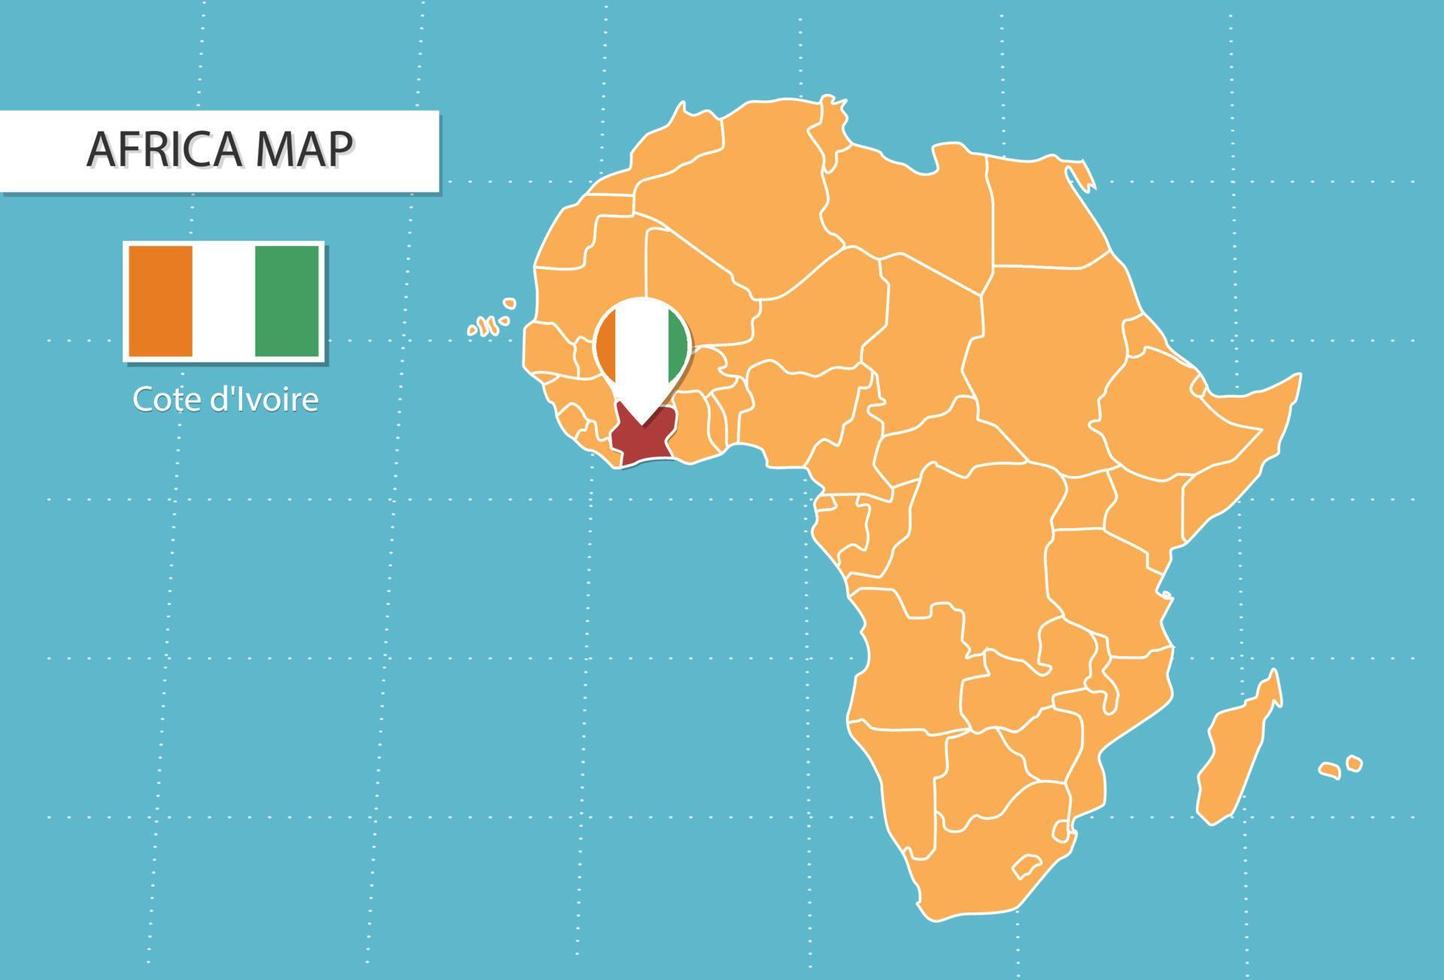 Cote d'Ivoire map in Africa, icons showing Cote d'Ivoire location and flags. vector